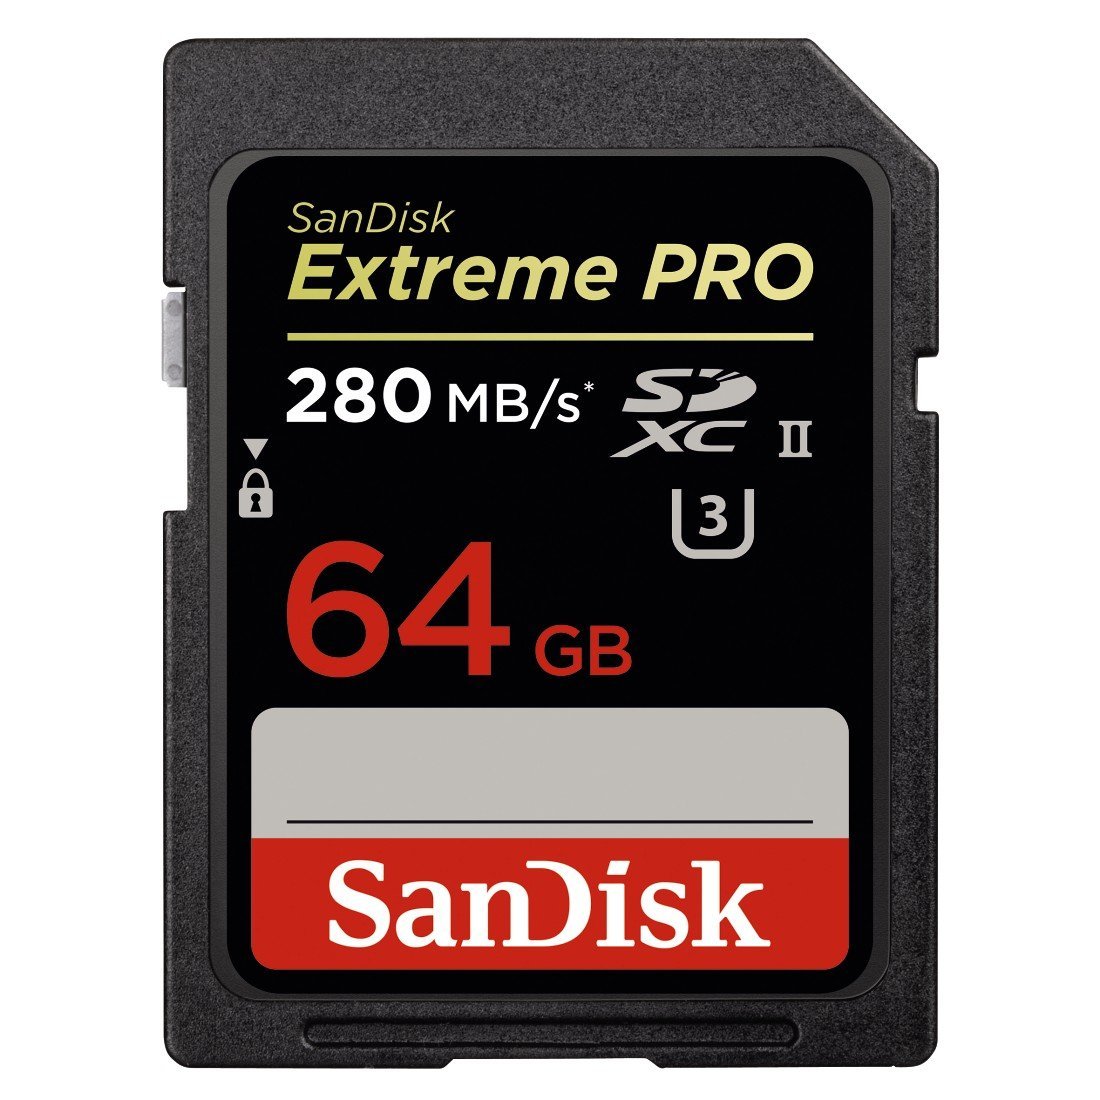 Thẻ nhớ SD Sandisk ExtremePro 64GB - 280MB/s SDSDXPB-064G-G46 